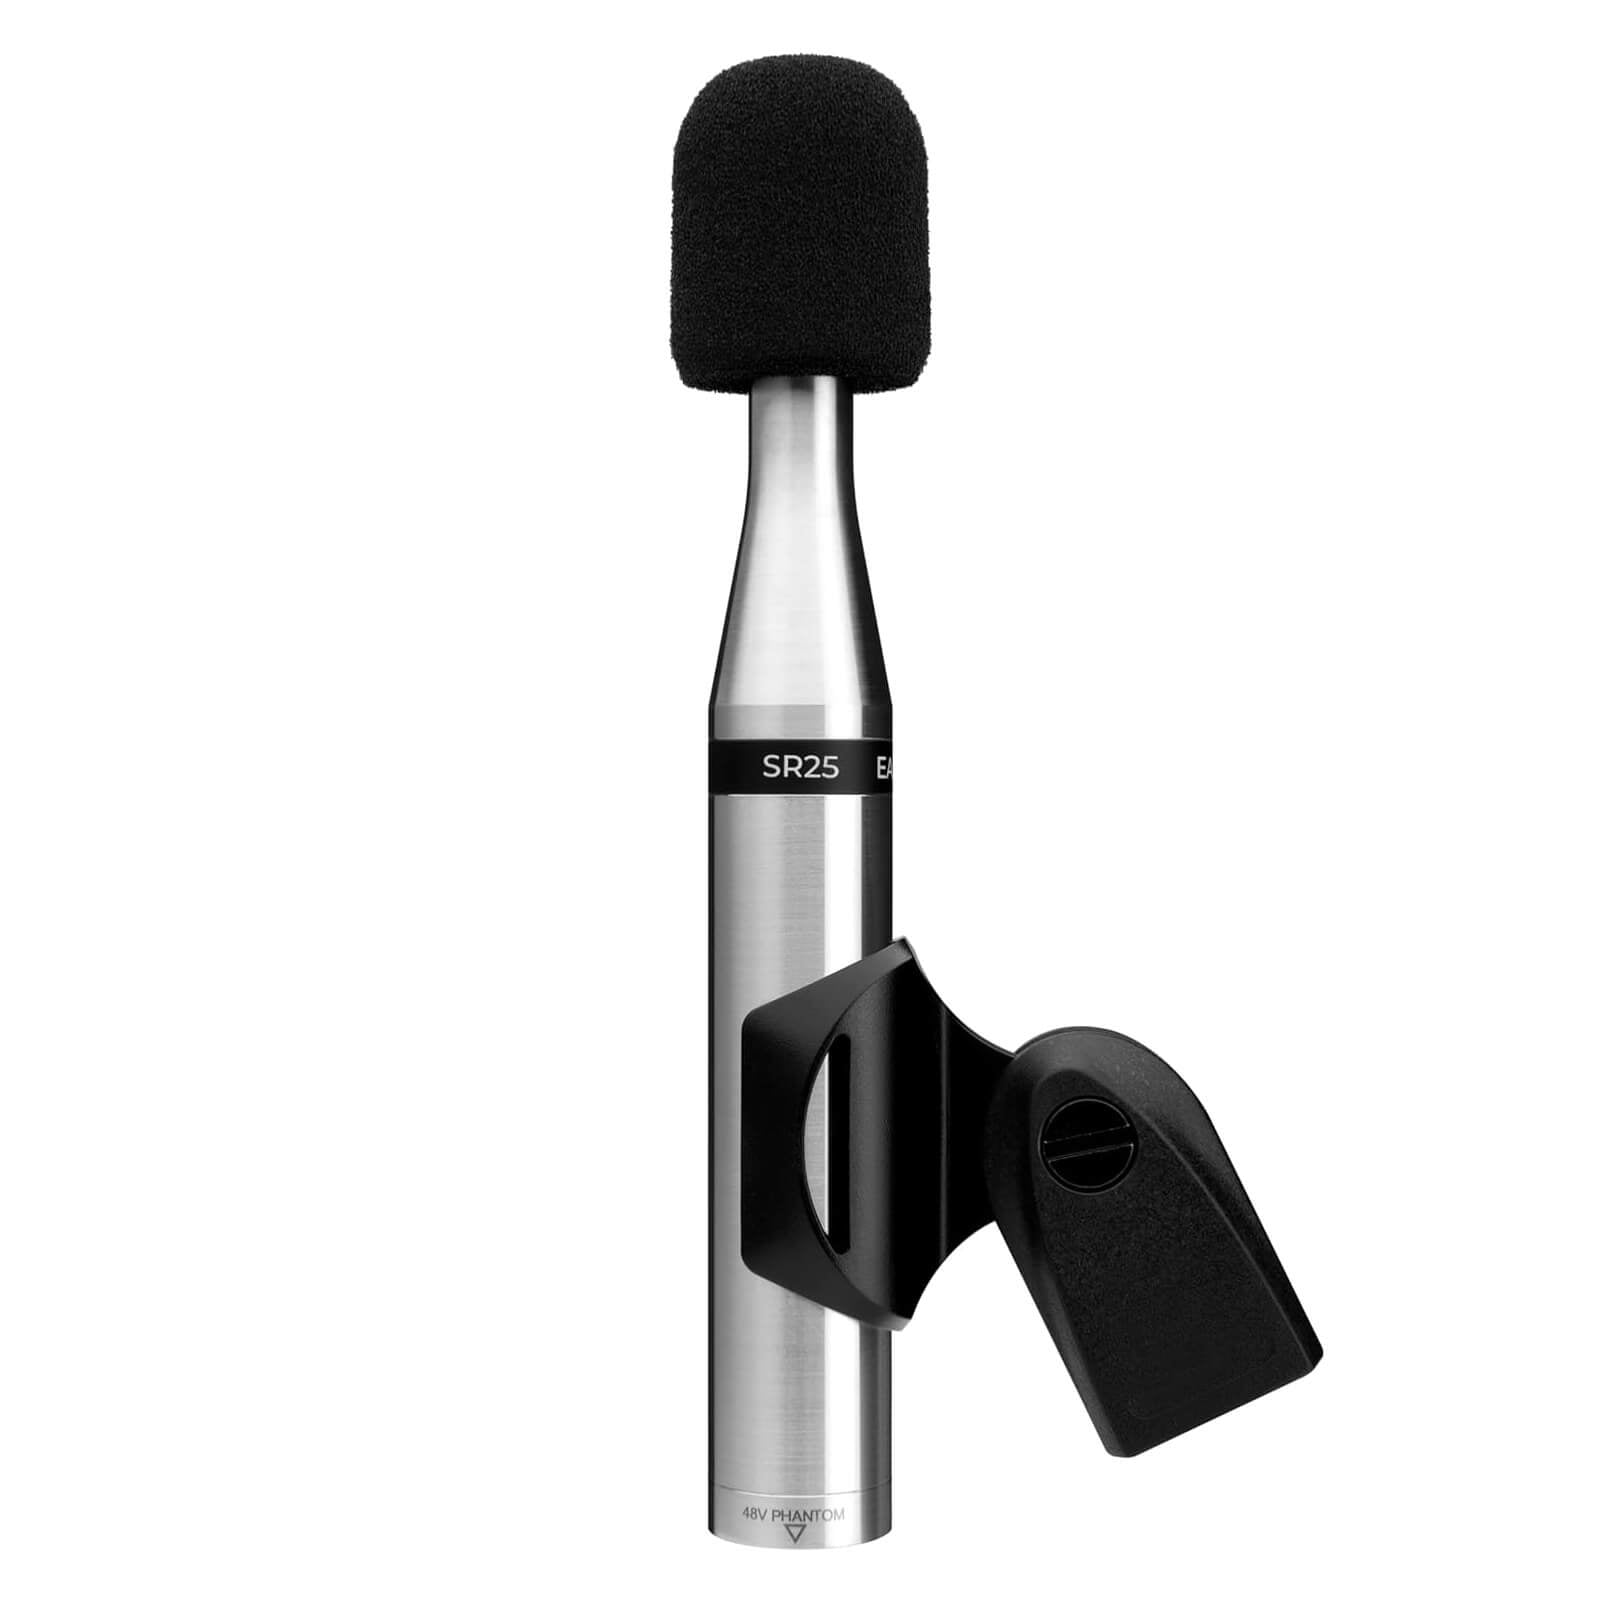 Earthworks SR25 - Drum Overhead Microphone, with clip and windscreen